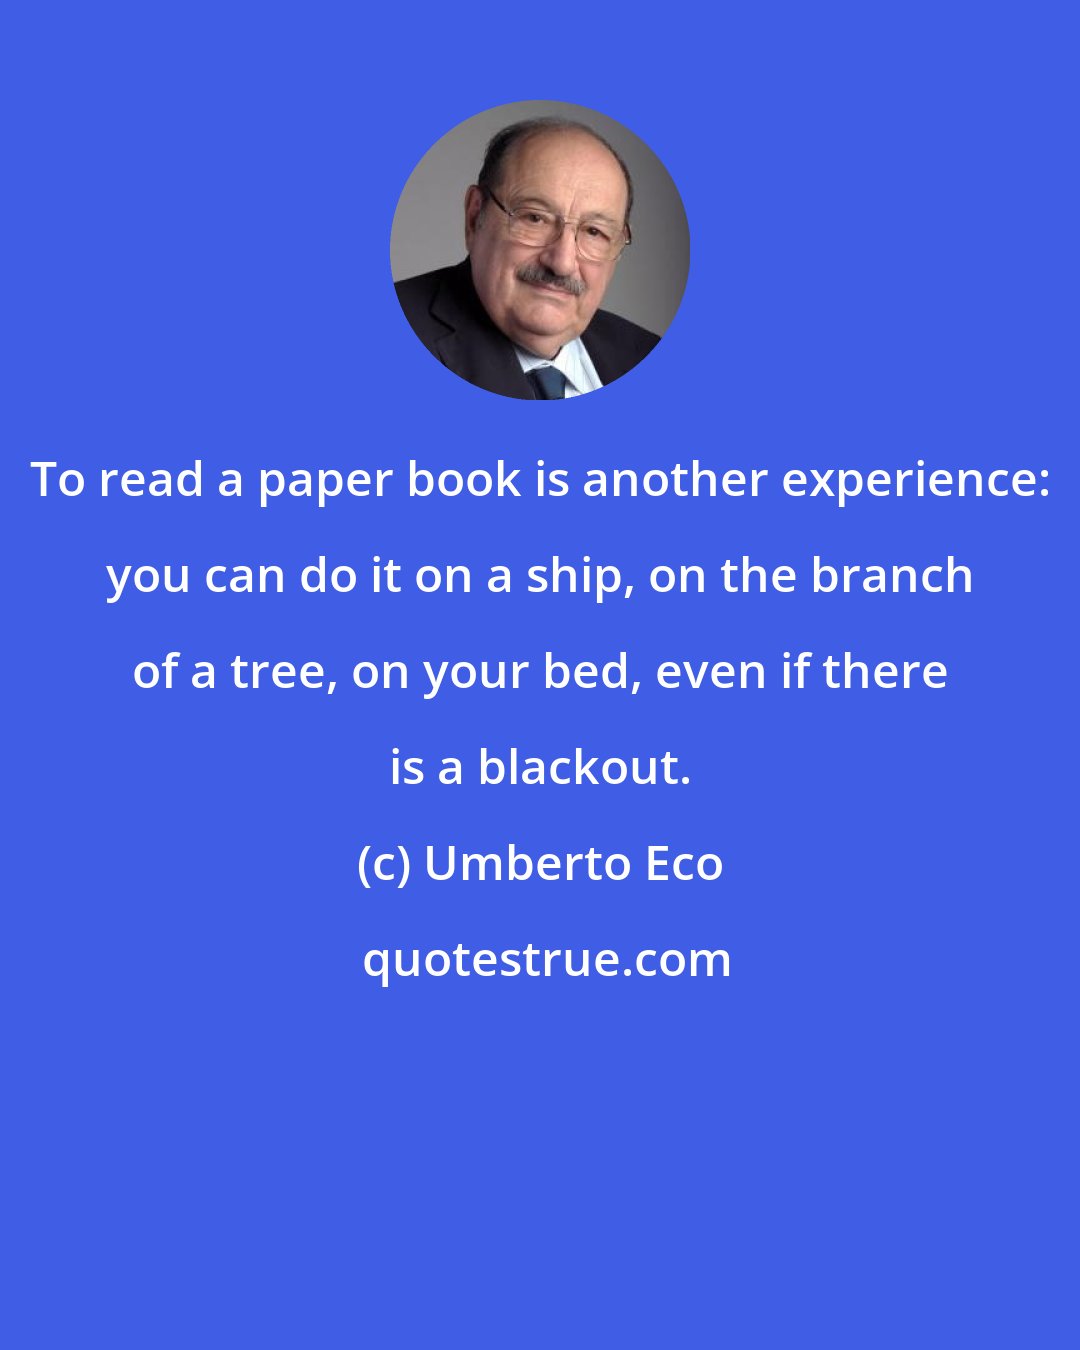 Umberto Eco: To read a paper book is another experience: you can do it on a ship, on the branch of a tree, on your bed, even if there is a blackout.